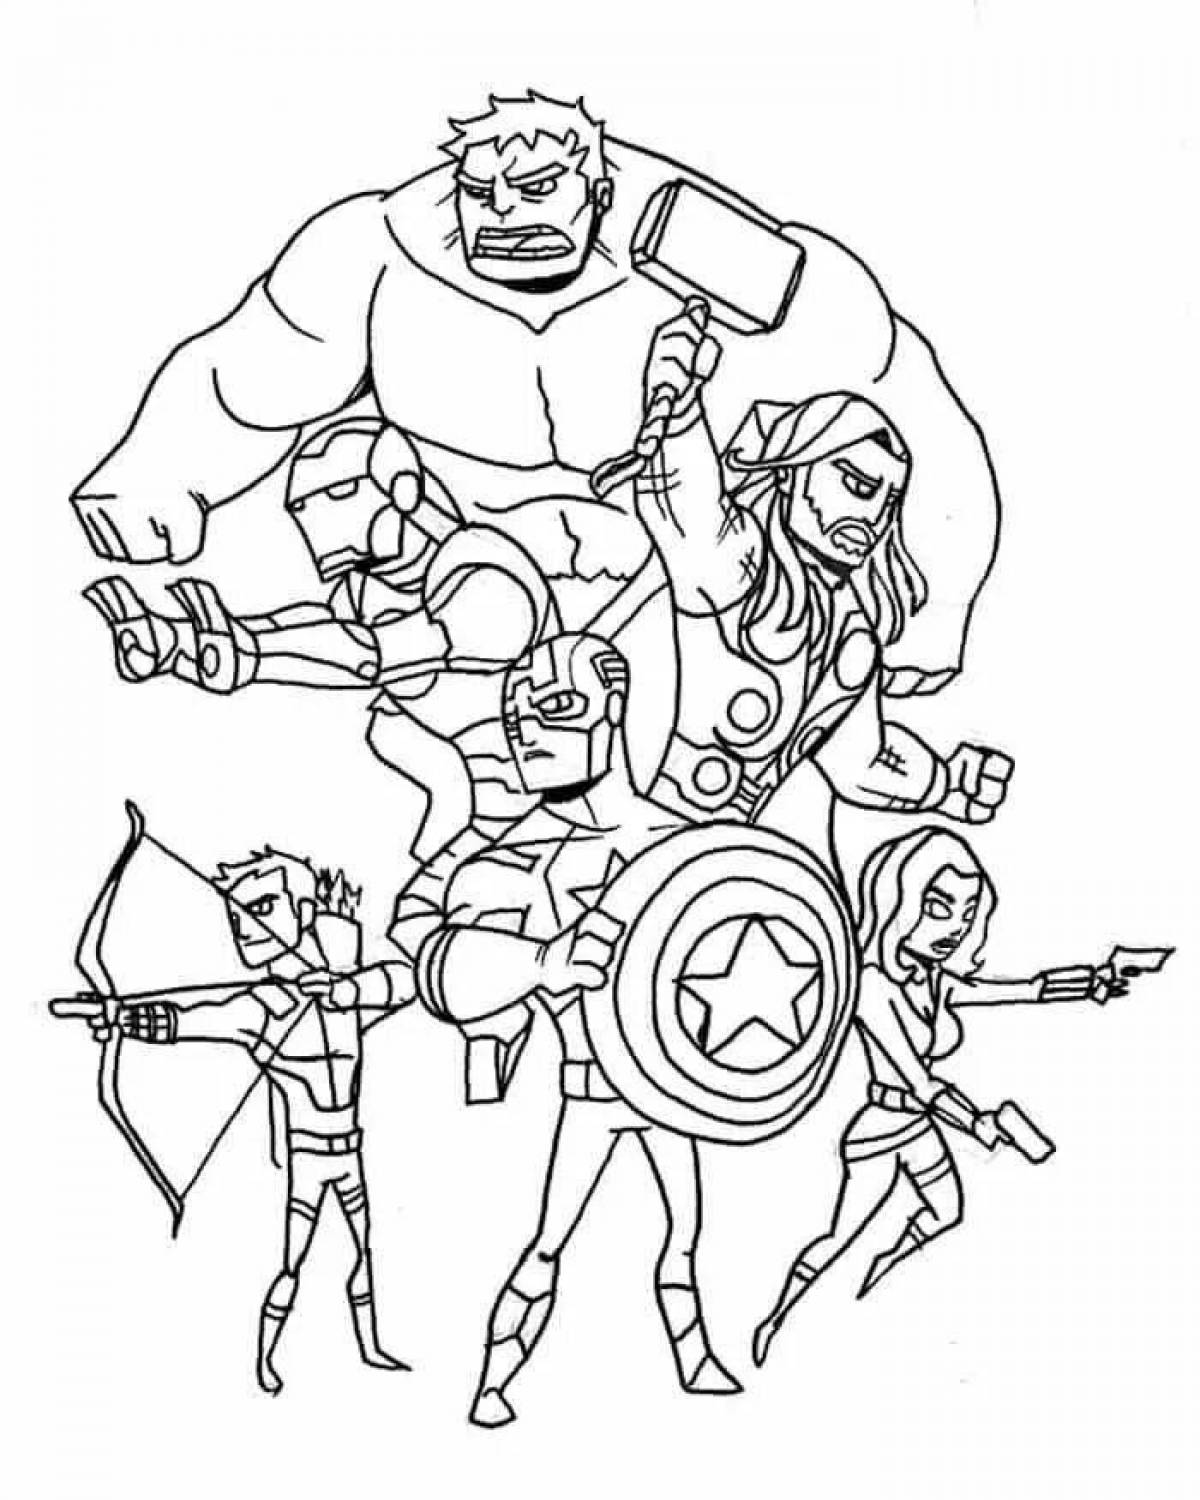 Adorable avengers coloring book